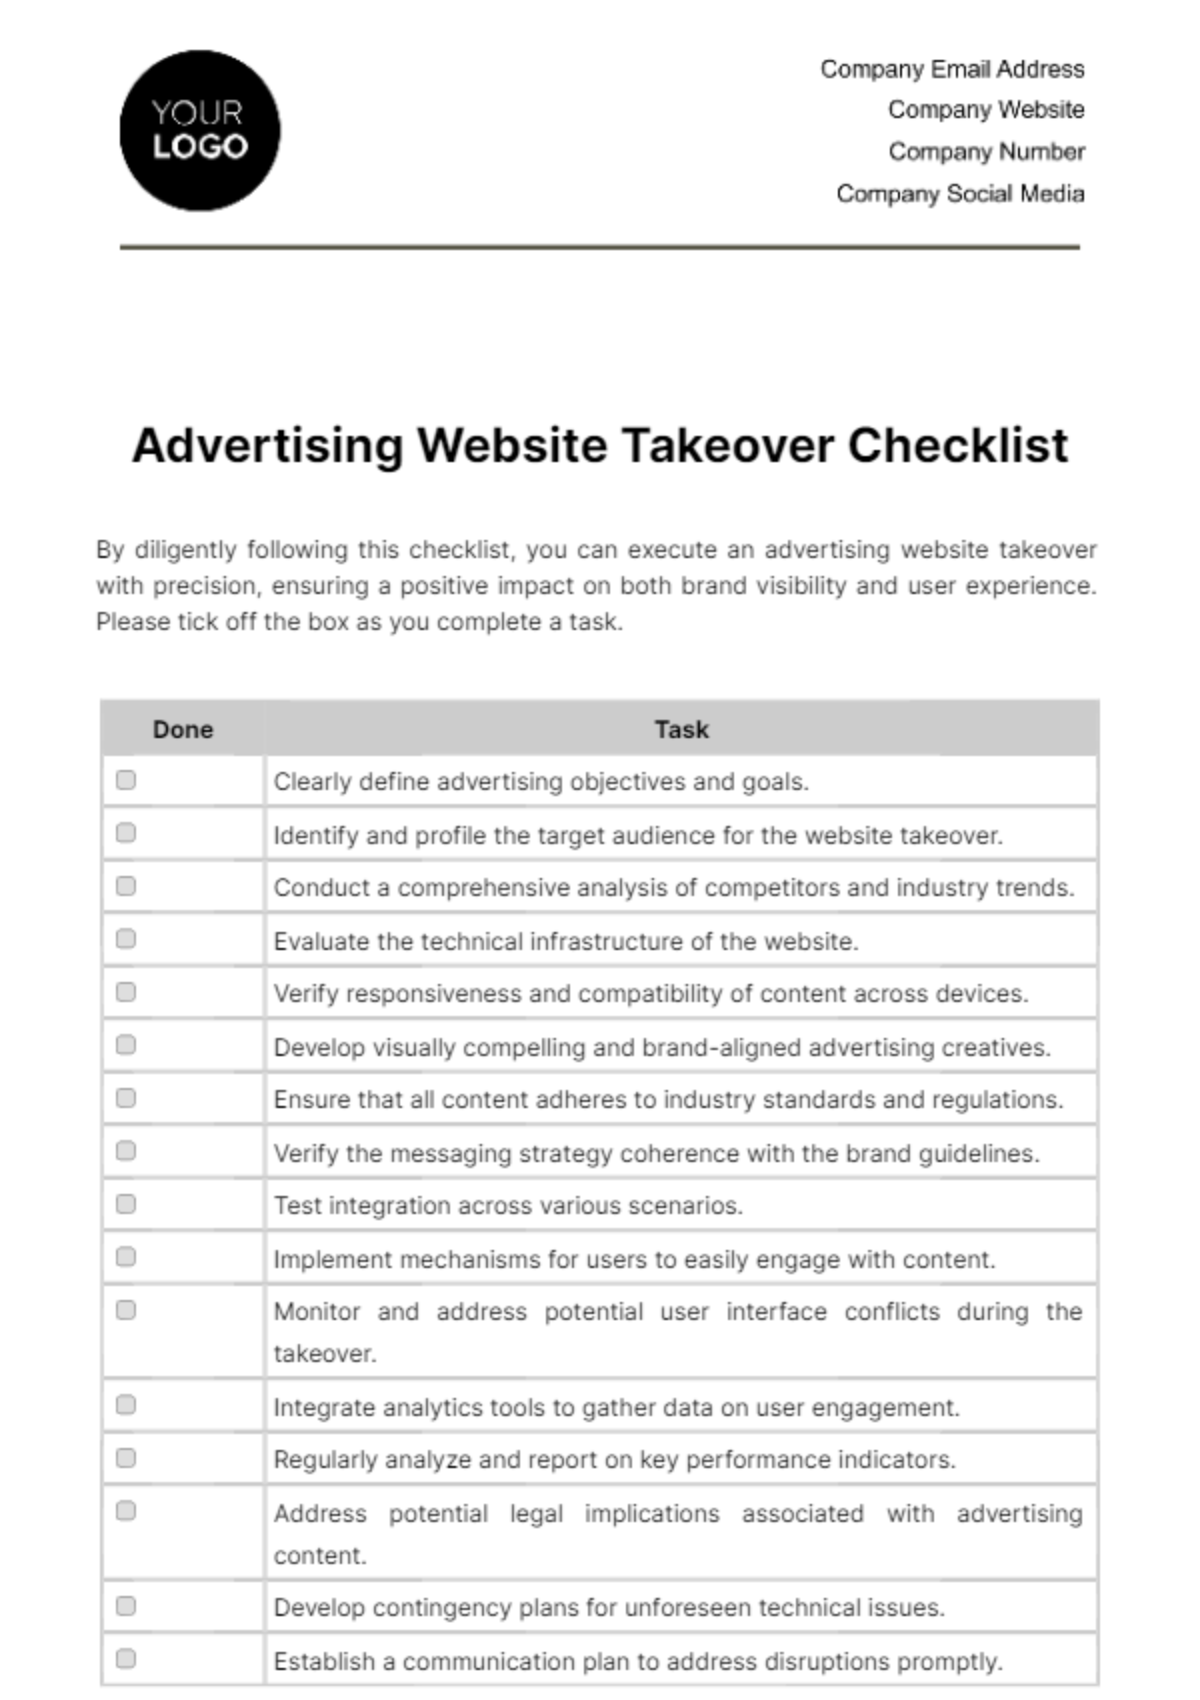 Free Advertising Website Takeover Checklist Template